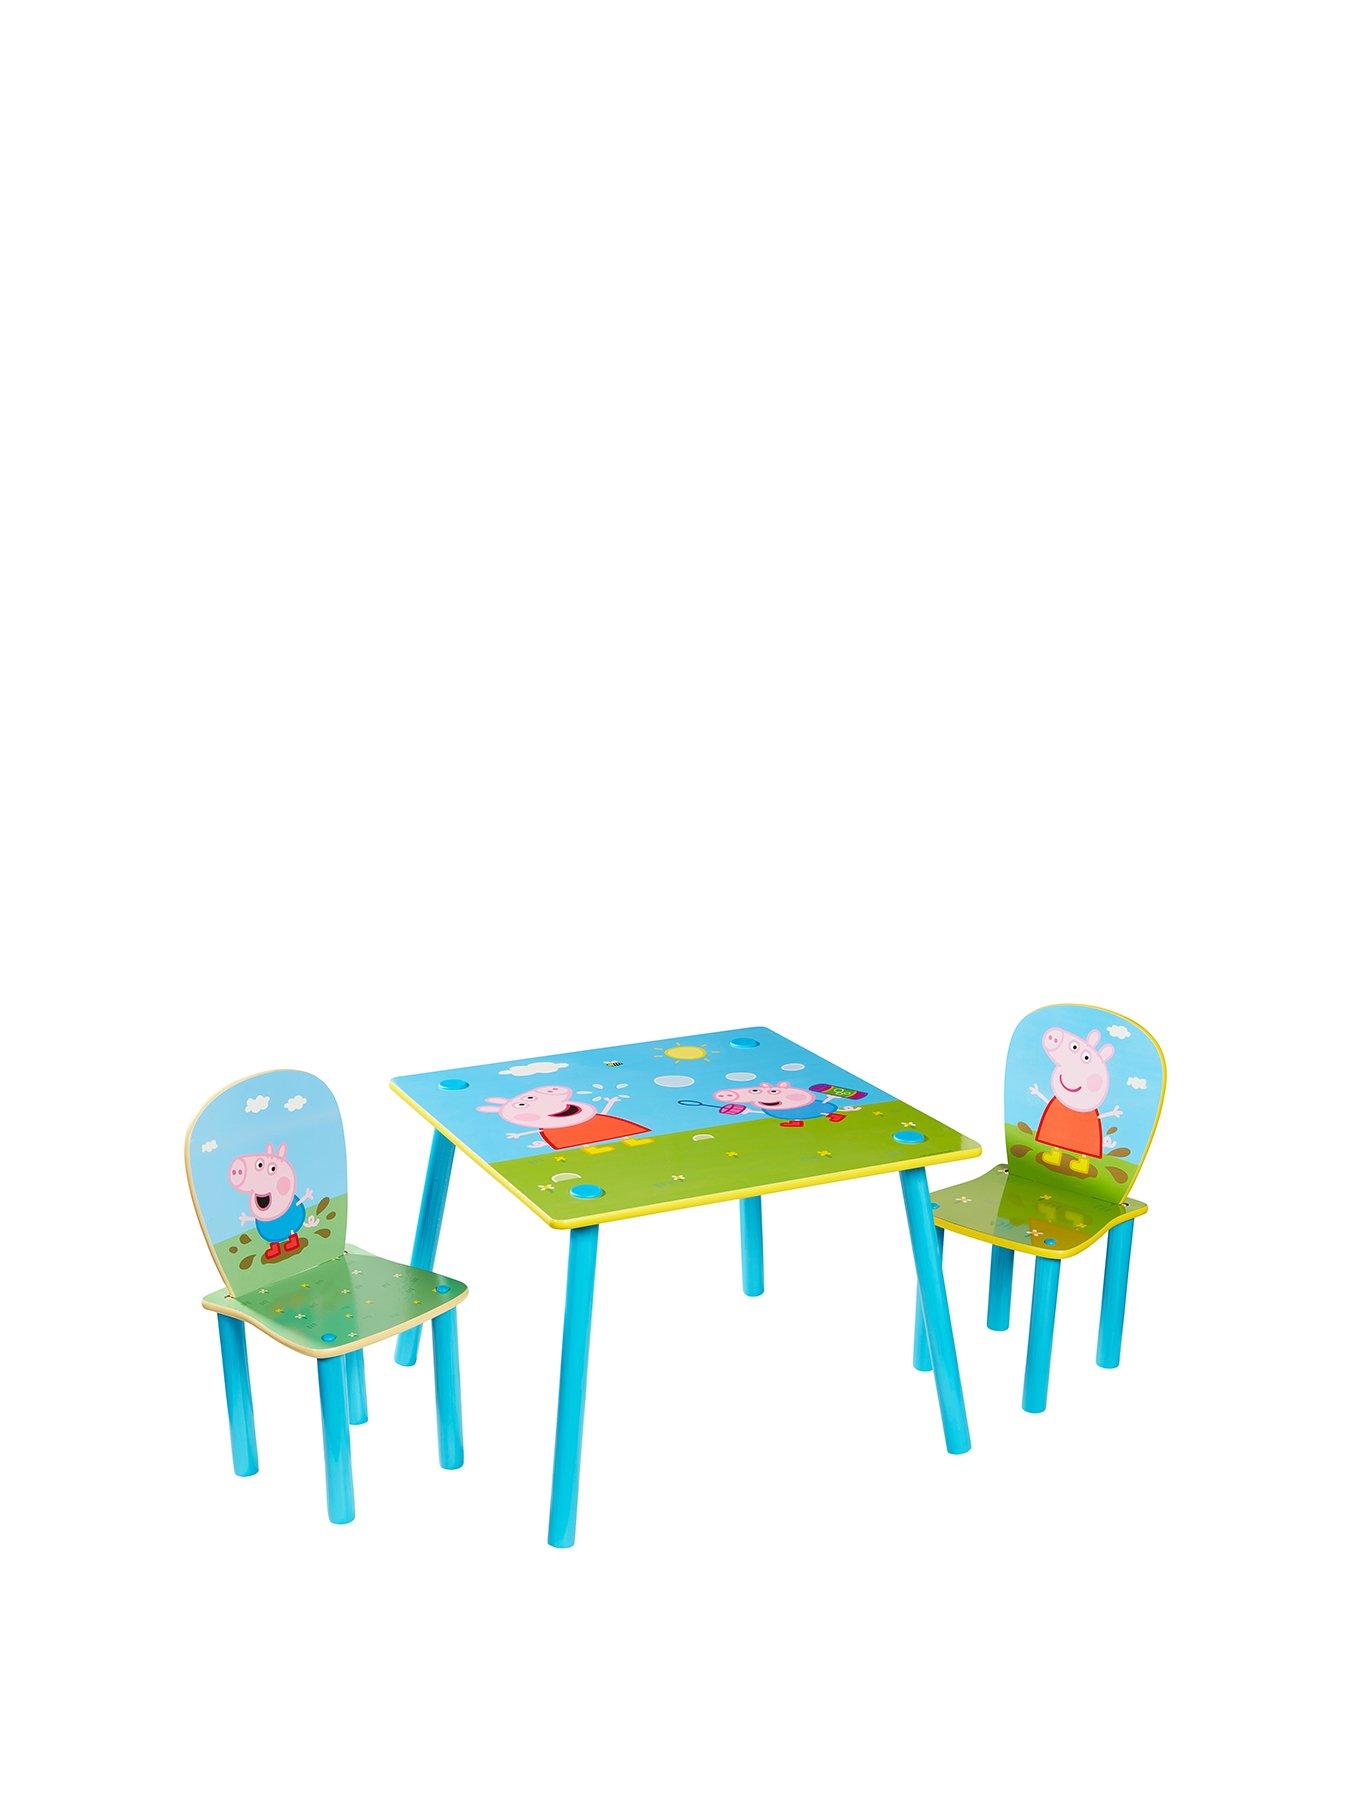 childrens table and chairs peppa pig